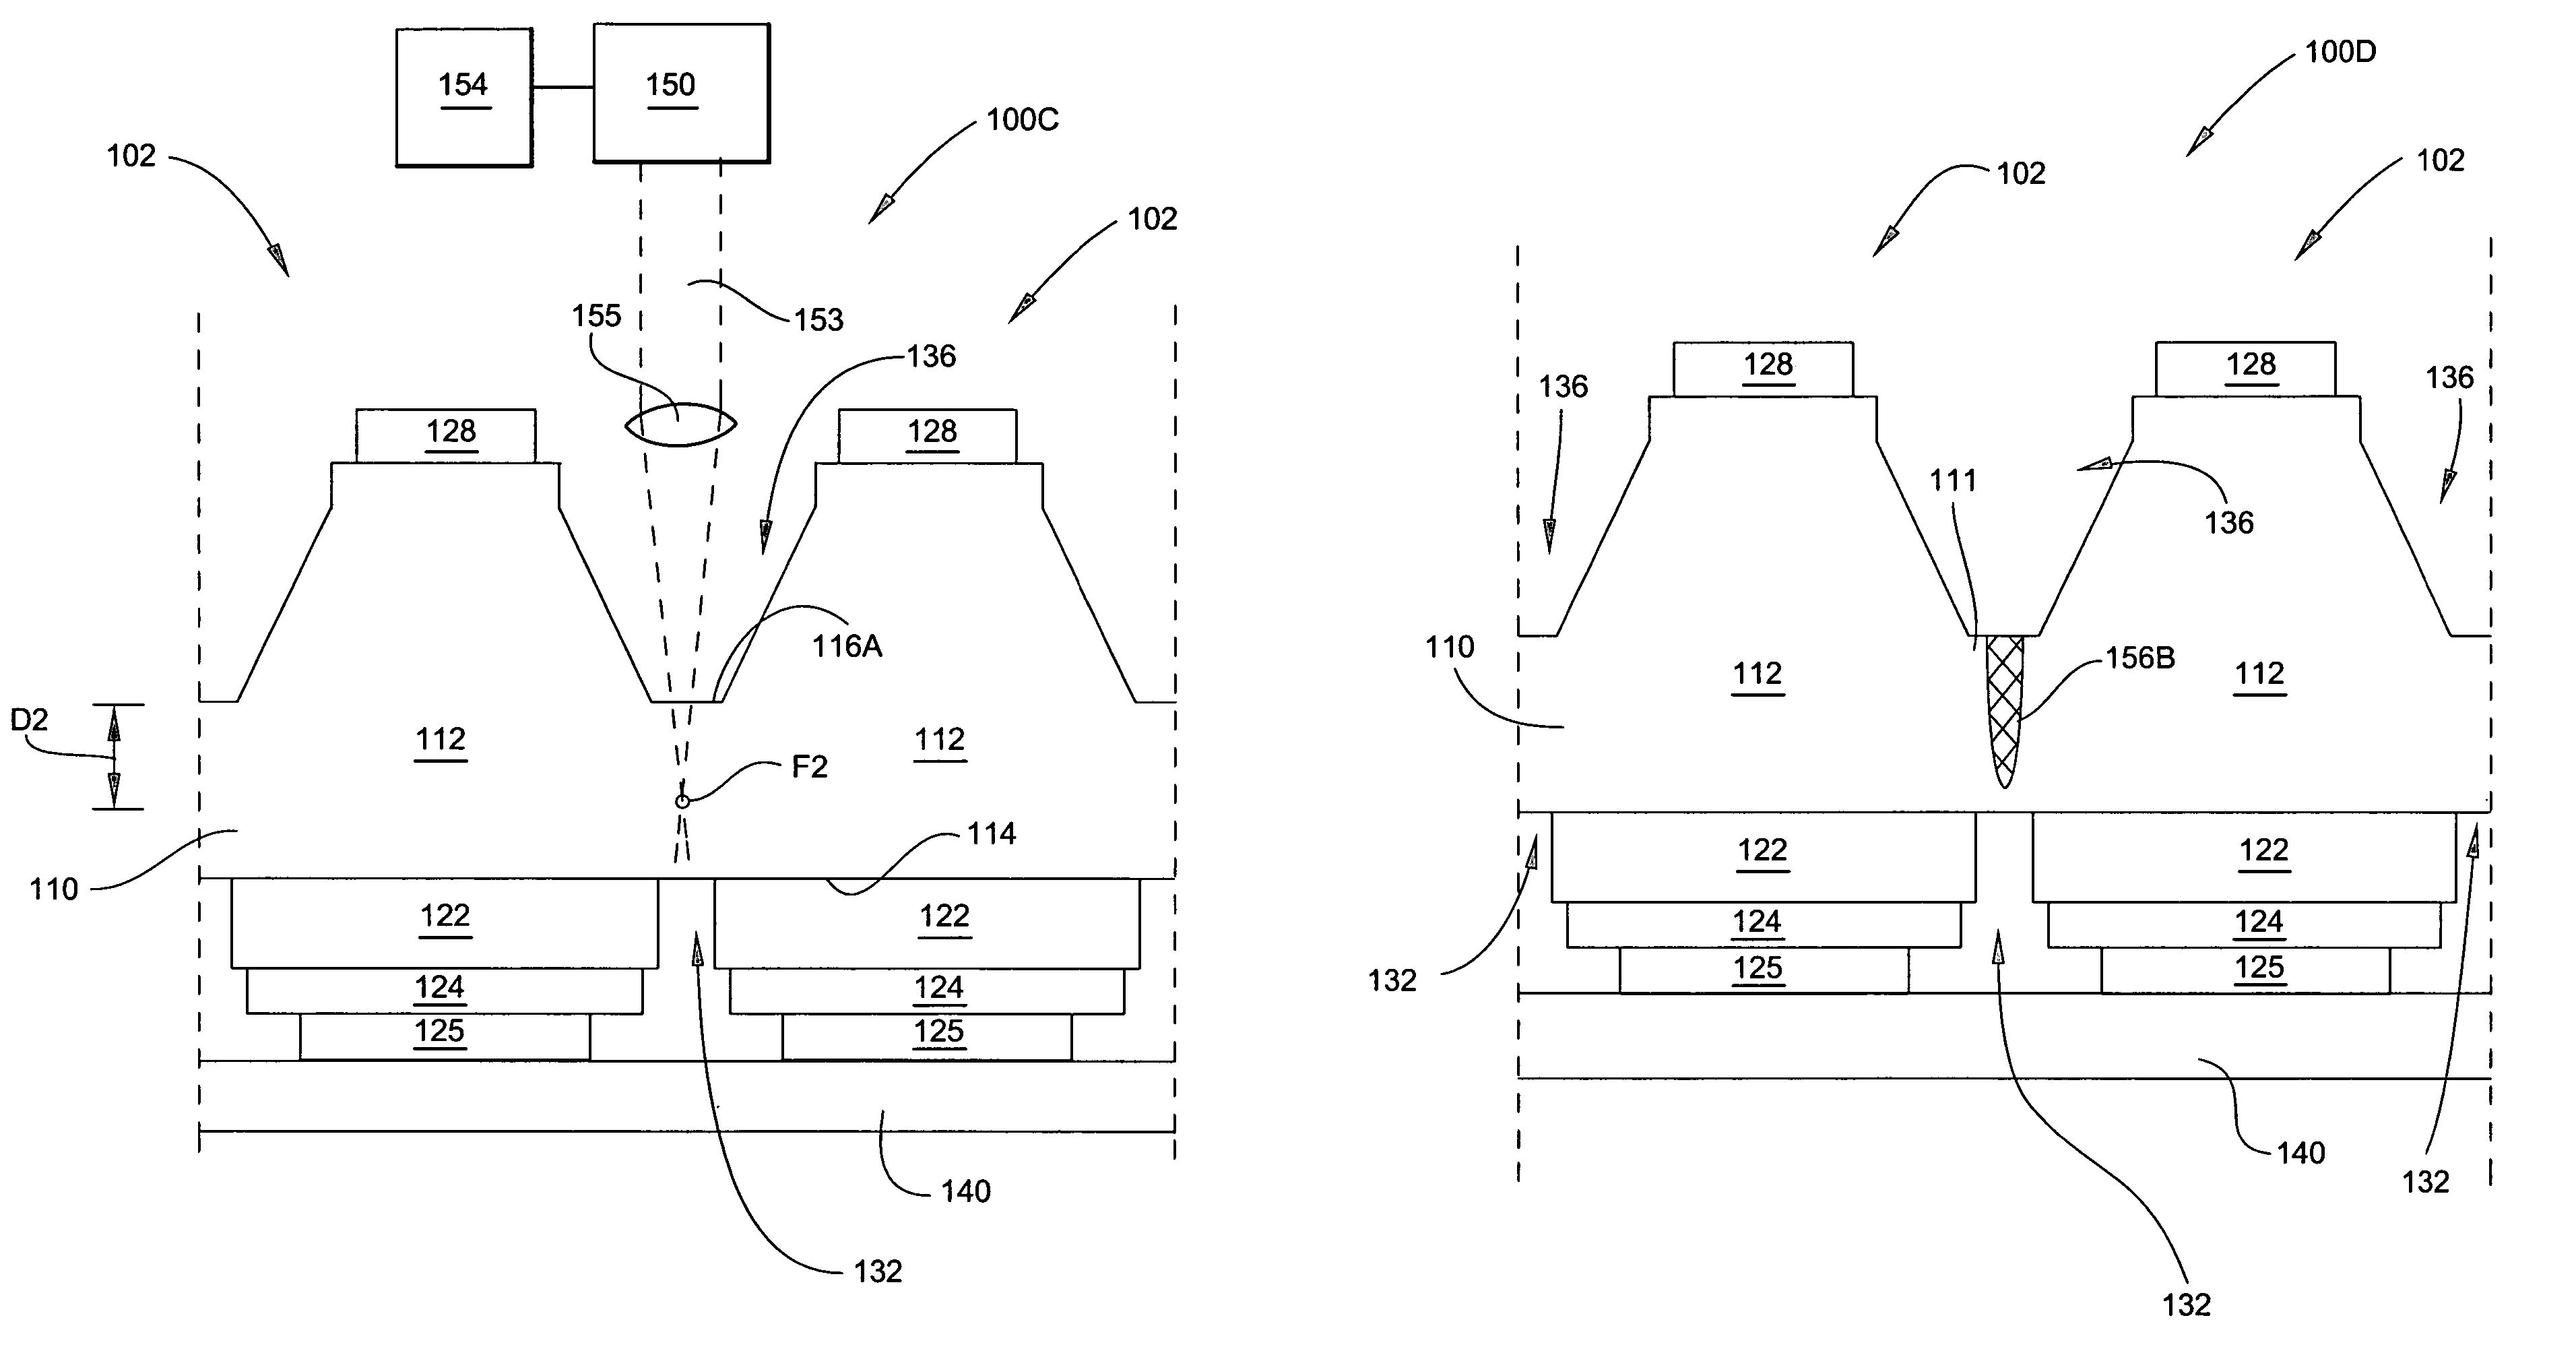 Semiconductor substrate assemblies and methods for preparing and dicing the same